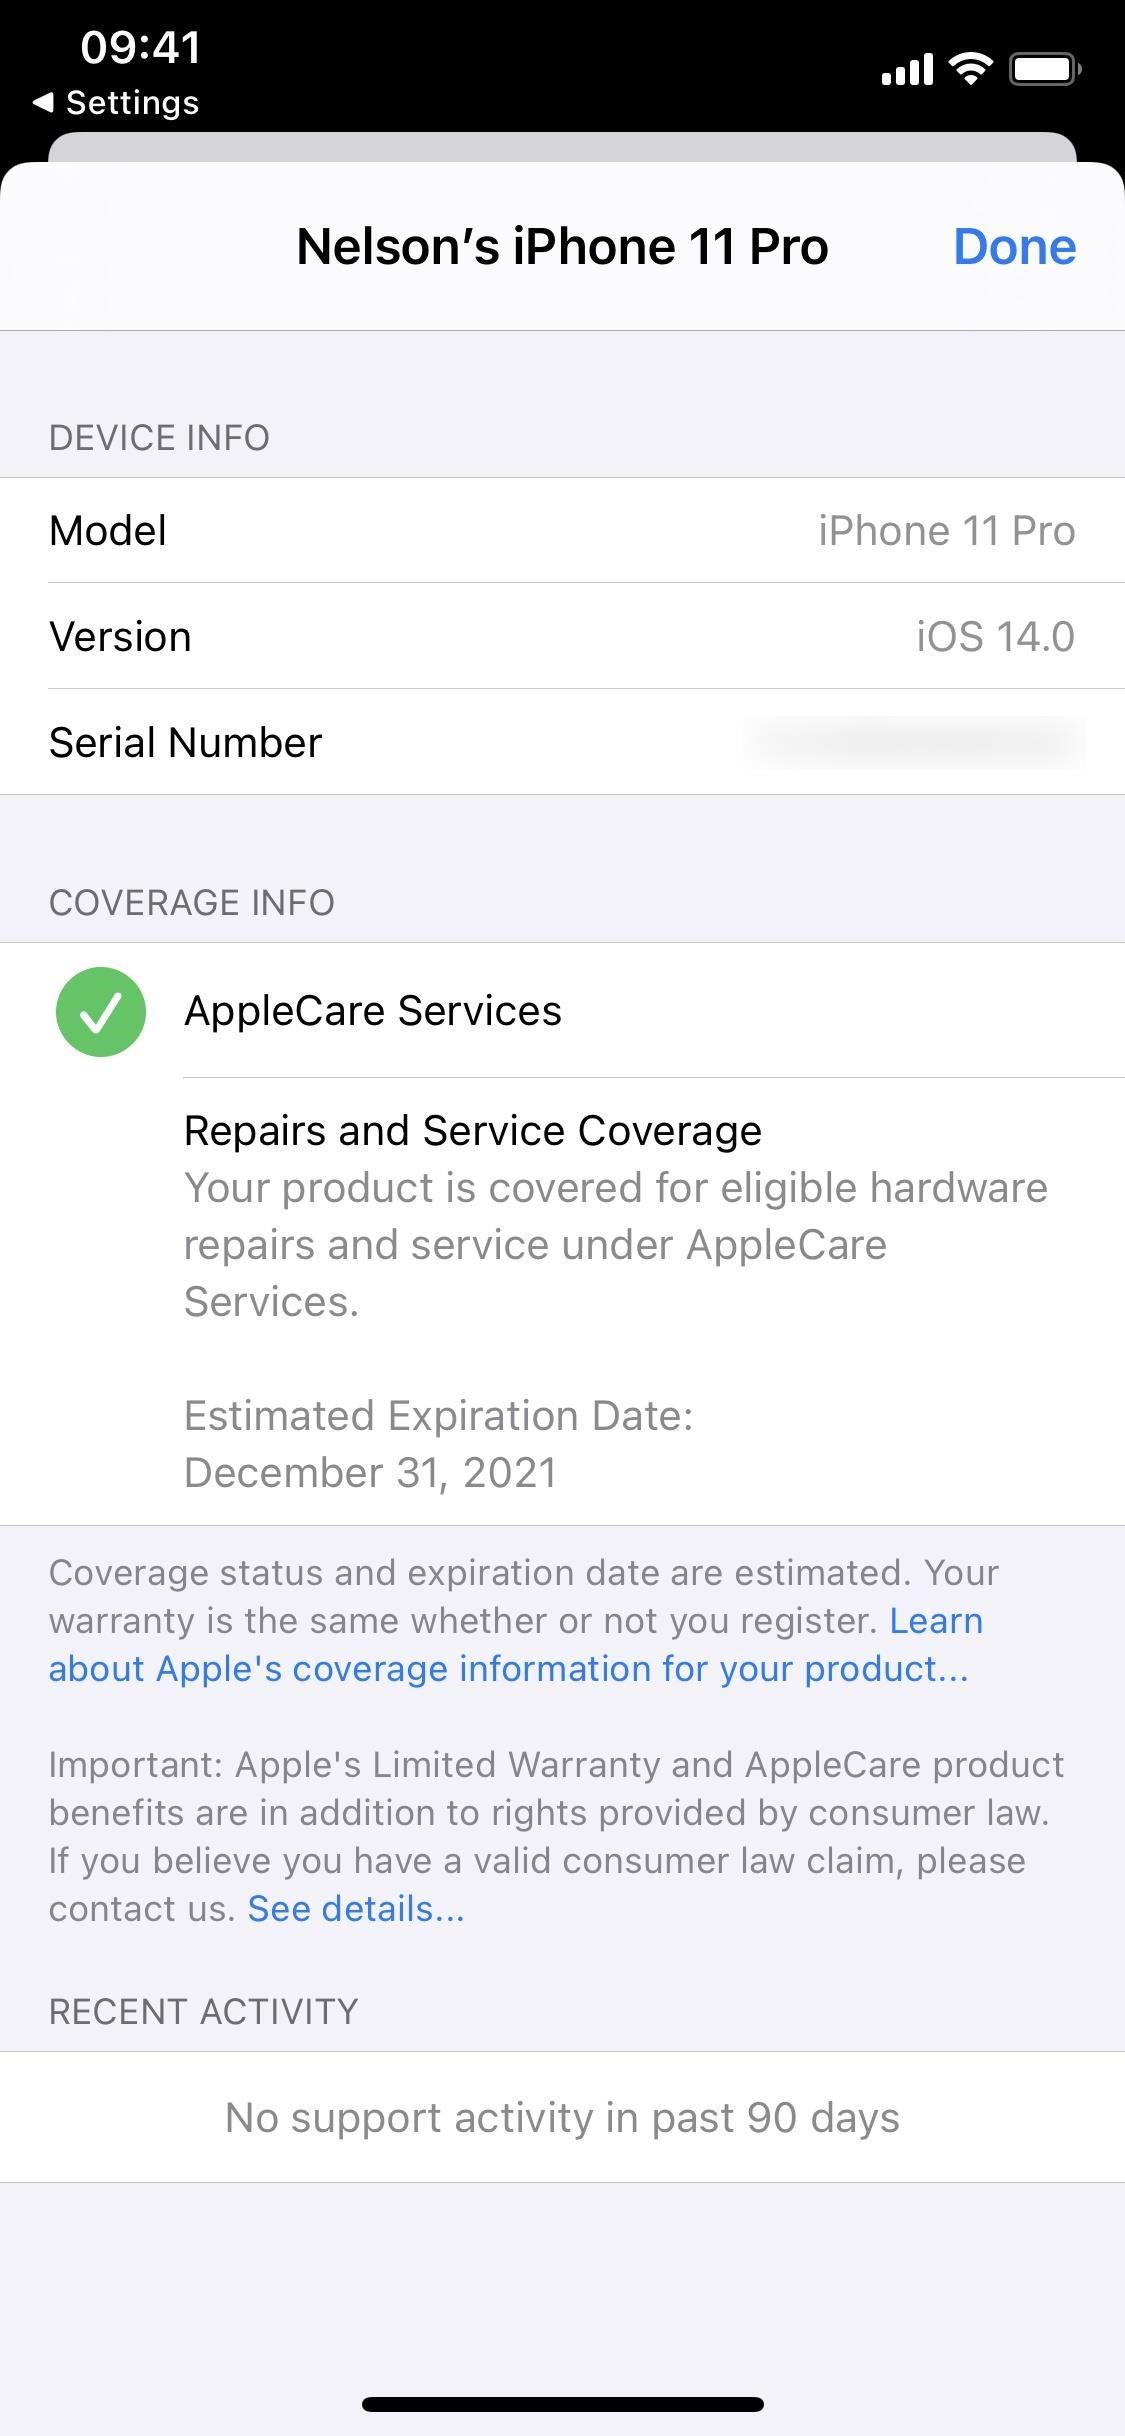 How to Quickly Check if Your iPhone Is Still Covered by Apple's Warranty or AppleCare